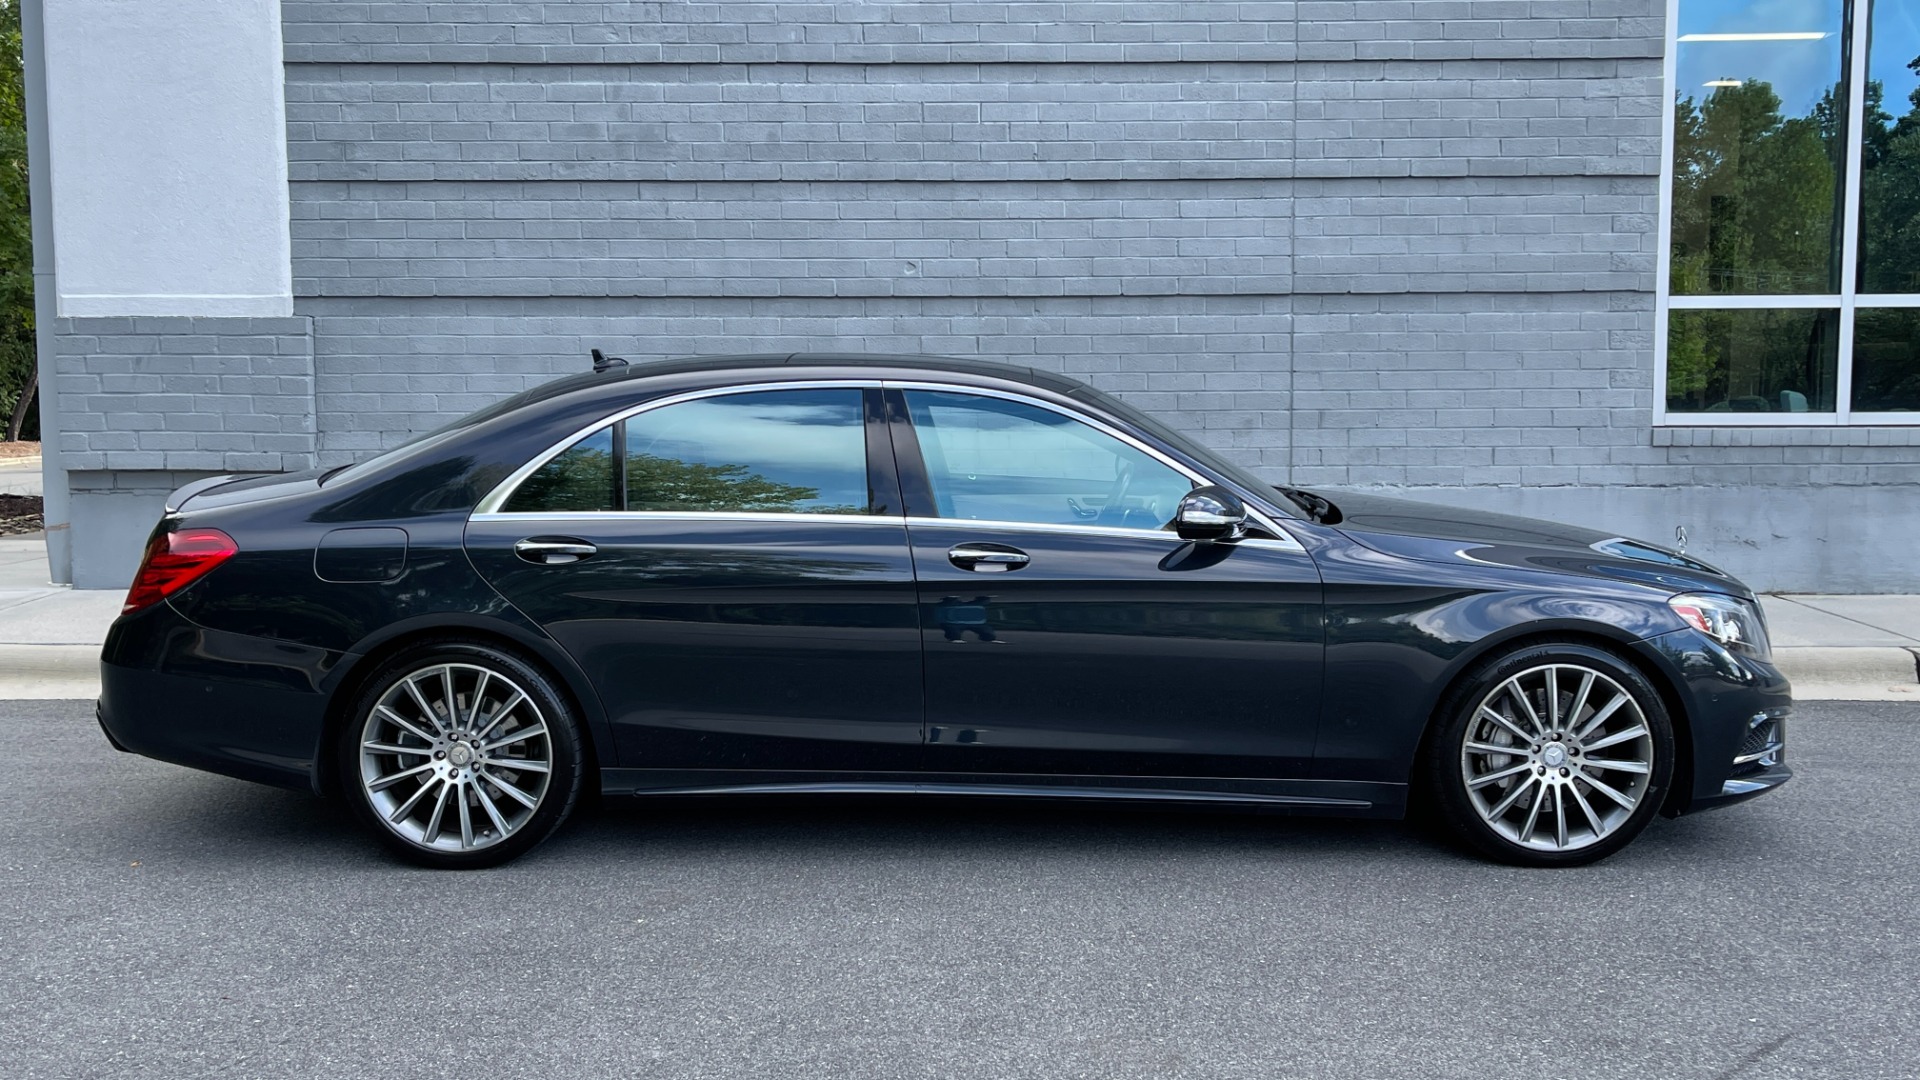 Used 2015 Mercedes-Benz S-Class S550 / REAR SEATING PACKAGE / PREMIUM / DRIVER ASSISTANCE for sale $39,995 at Formula Imports in Charlotte NC 28227 2